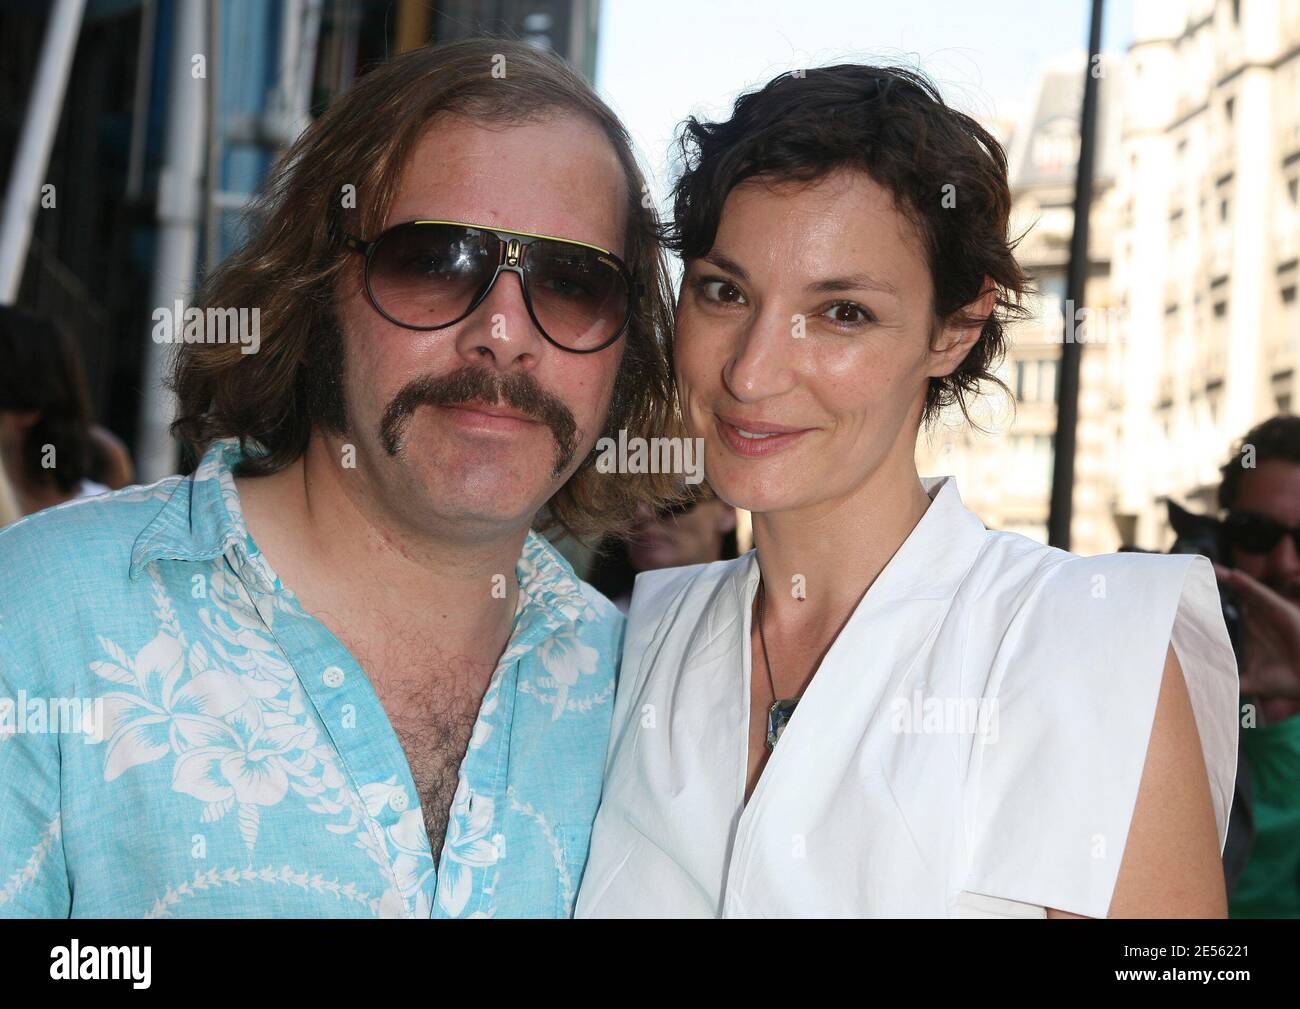 Philippe Katerine and Jeanne Balibar arriving at Christian Lacroix  Fall-Winter 2008-2009 Haute-Couture collection show in Paris, France on  July 1, 2008. Photo by Denis Guignebourg/ABACAPRESS.COM Stock Photo - Alamy